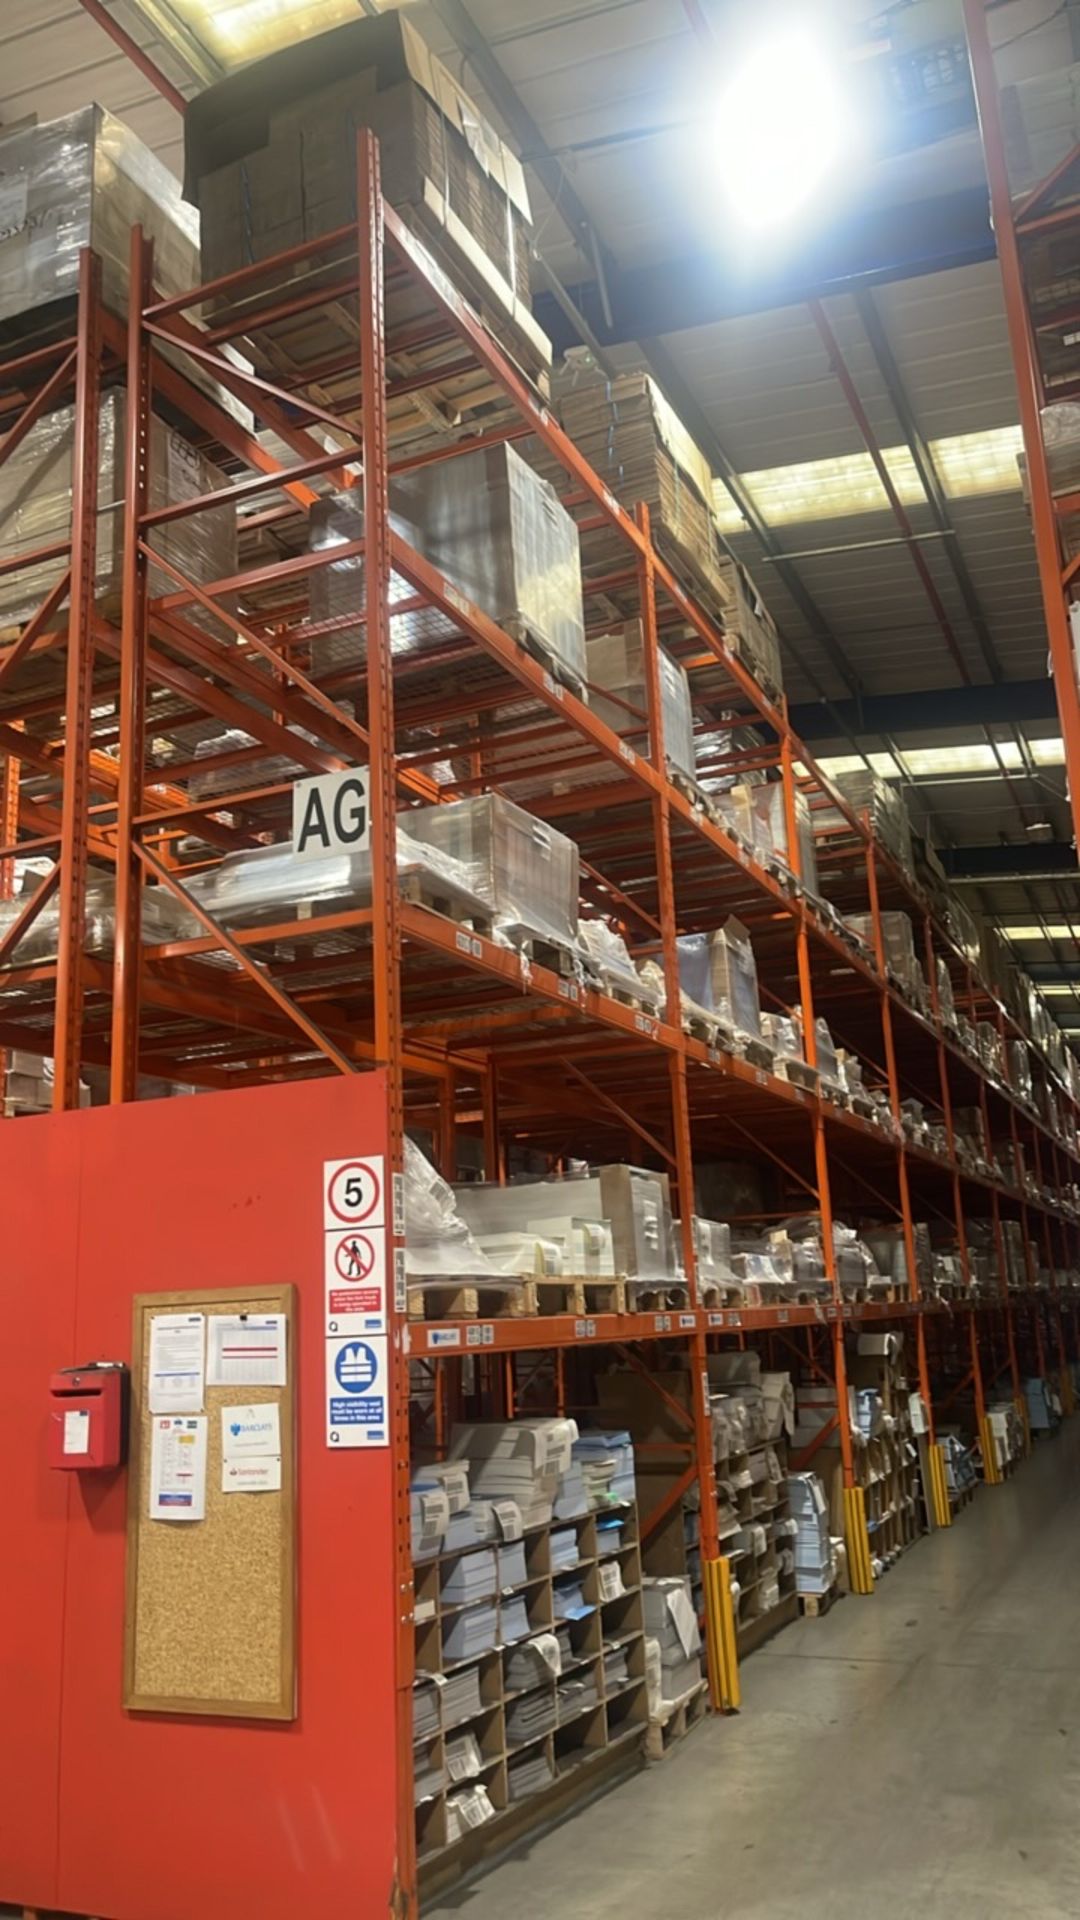 23 Bays Of Boltless Pallet Racking - Image 8 of 9